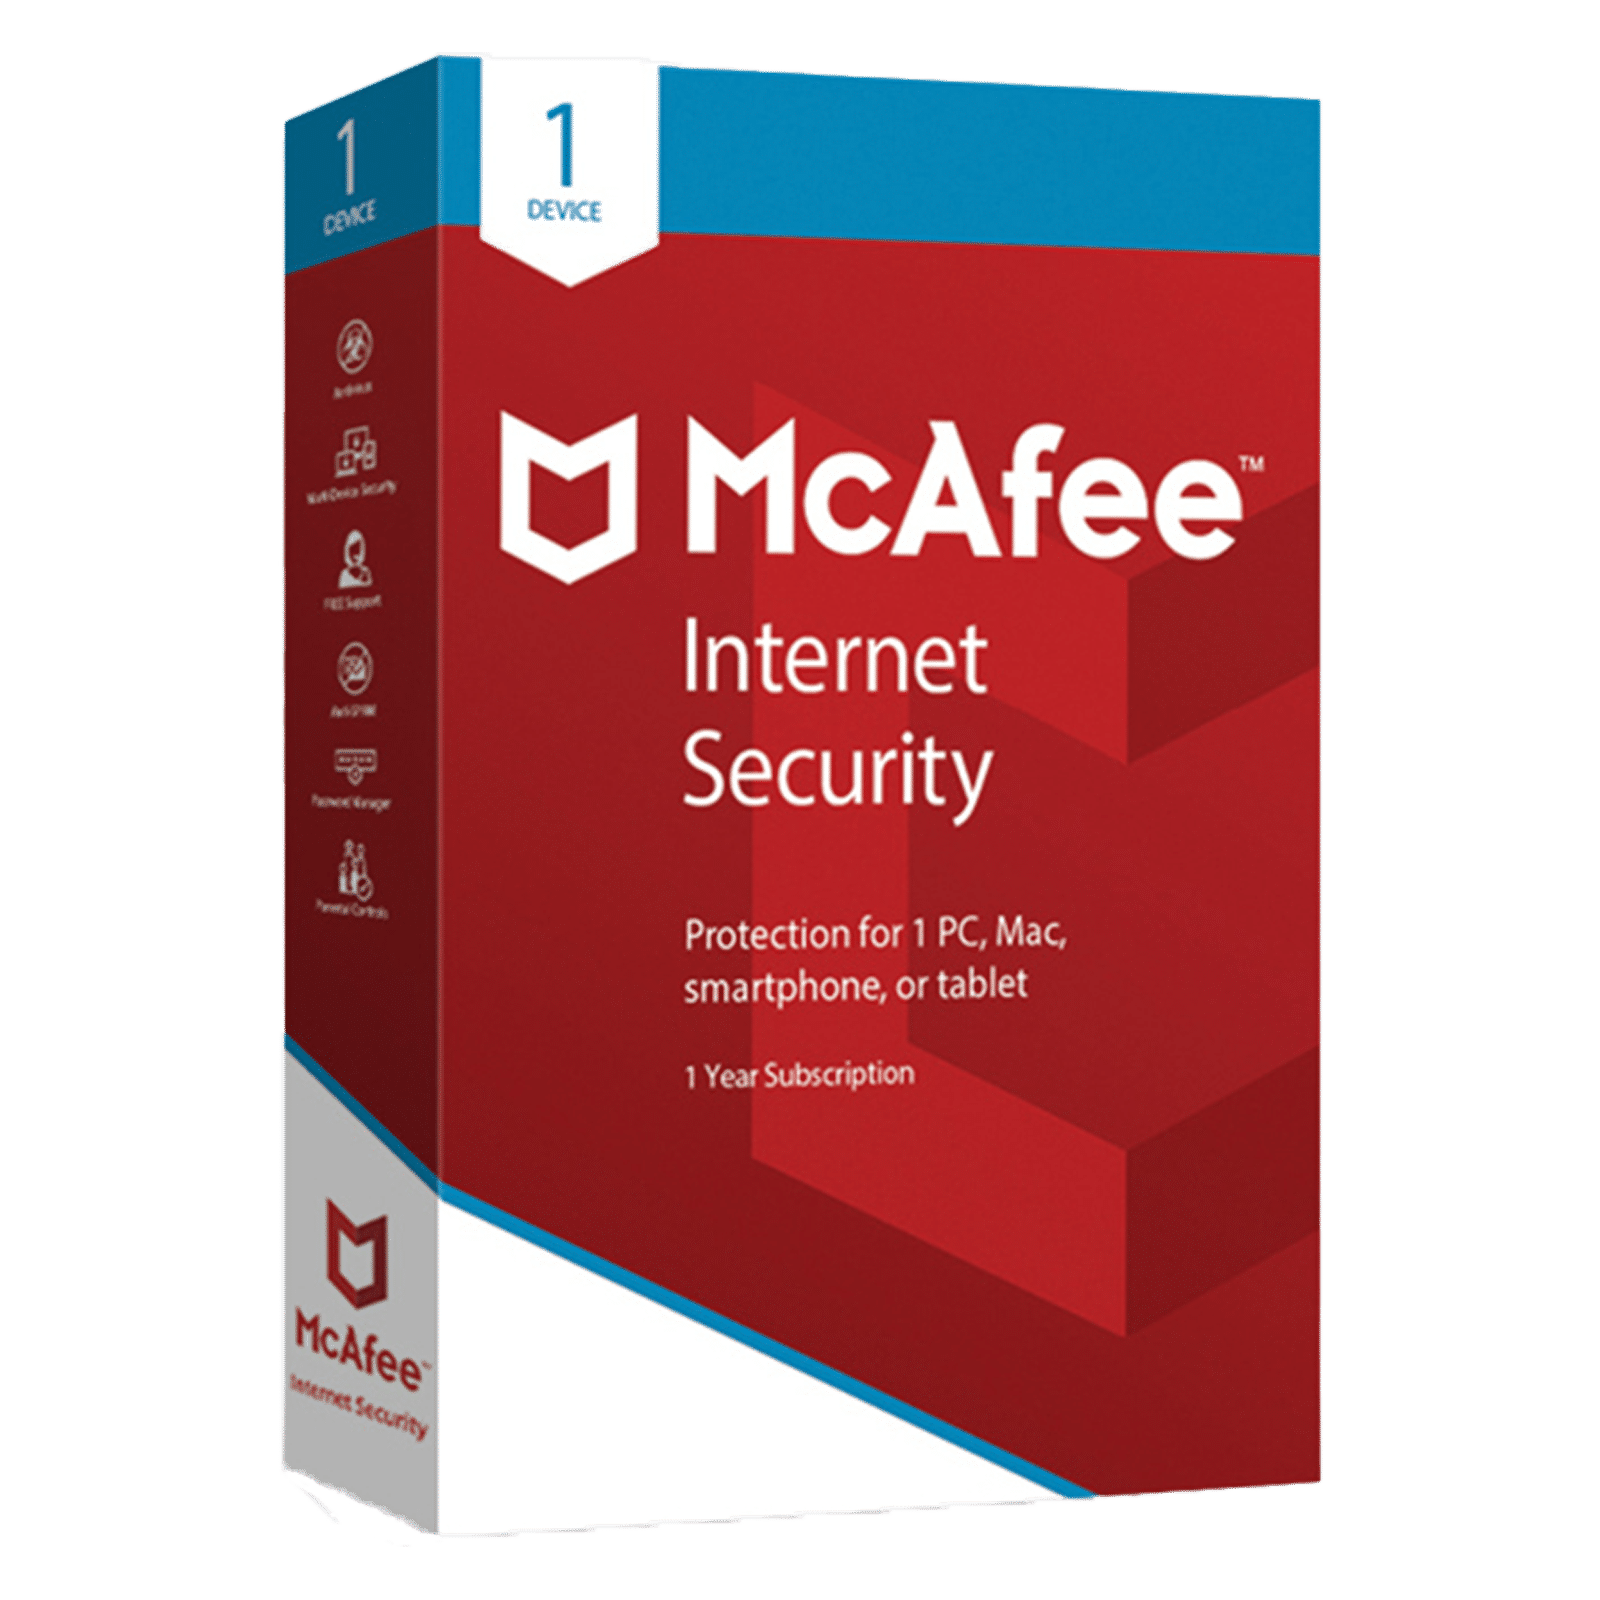 Buy McAfee Antivirus and Internet Security (1 Device, 1 Year